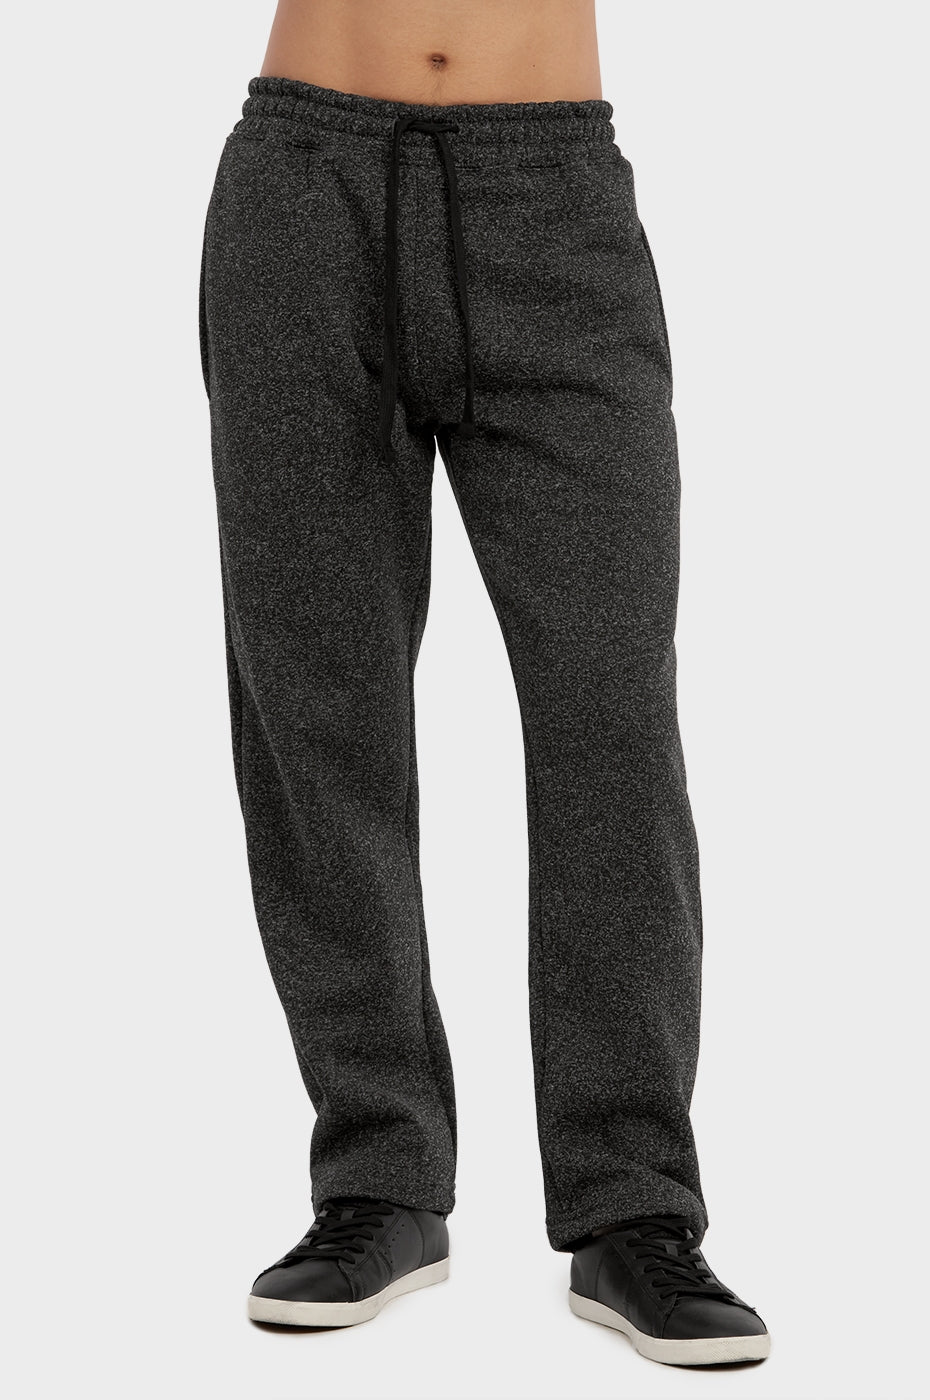 Lands' End Adult Serious Sweats High Pile Fleece Lined Sweatpants - X Large  - Pewter Heather : Target